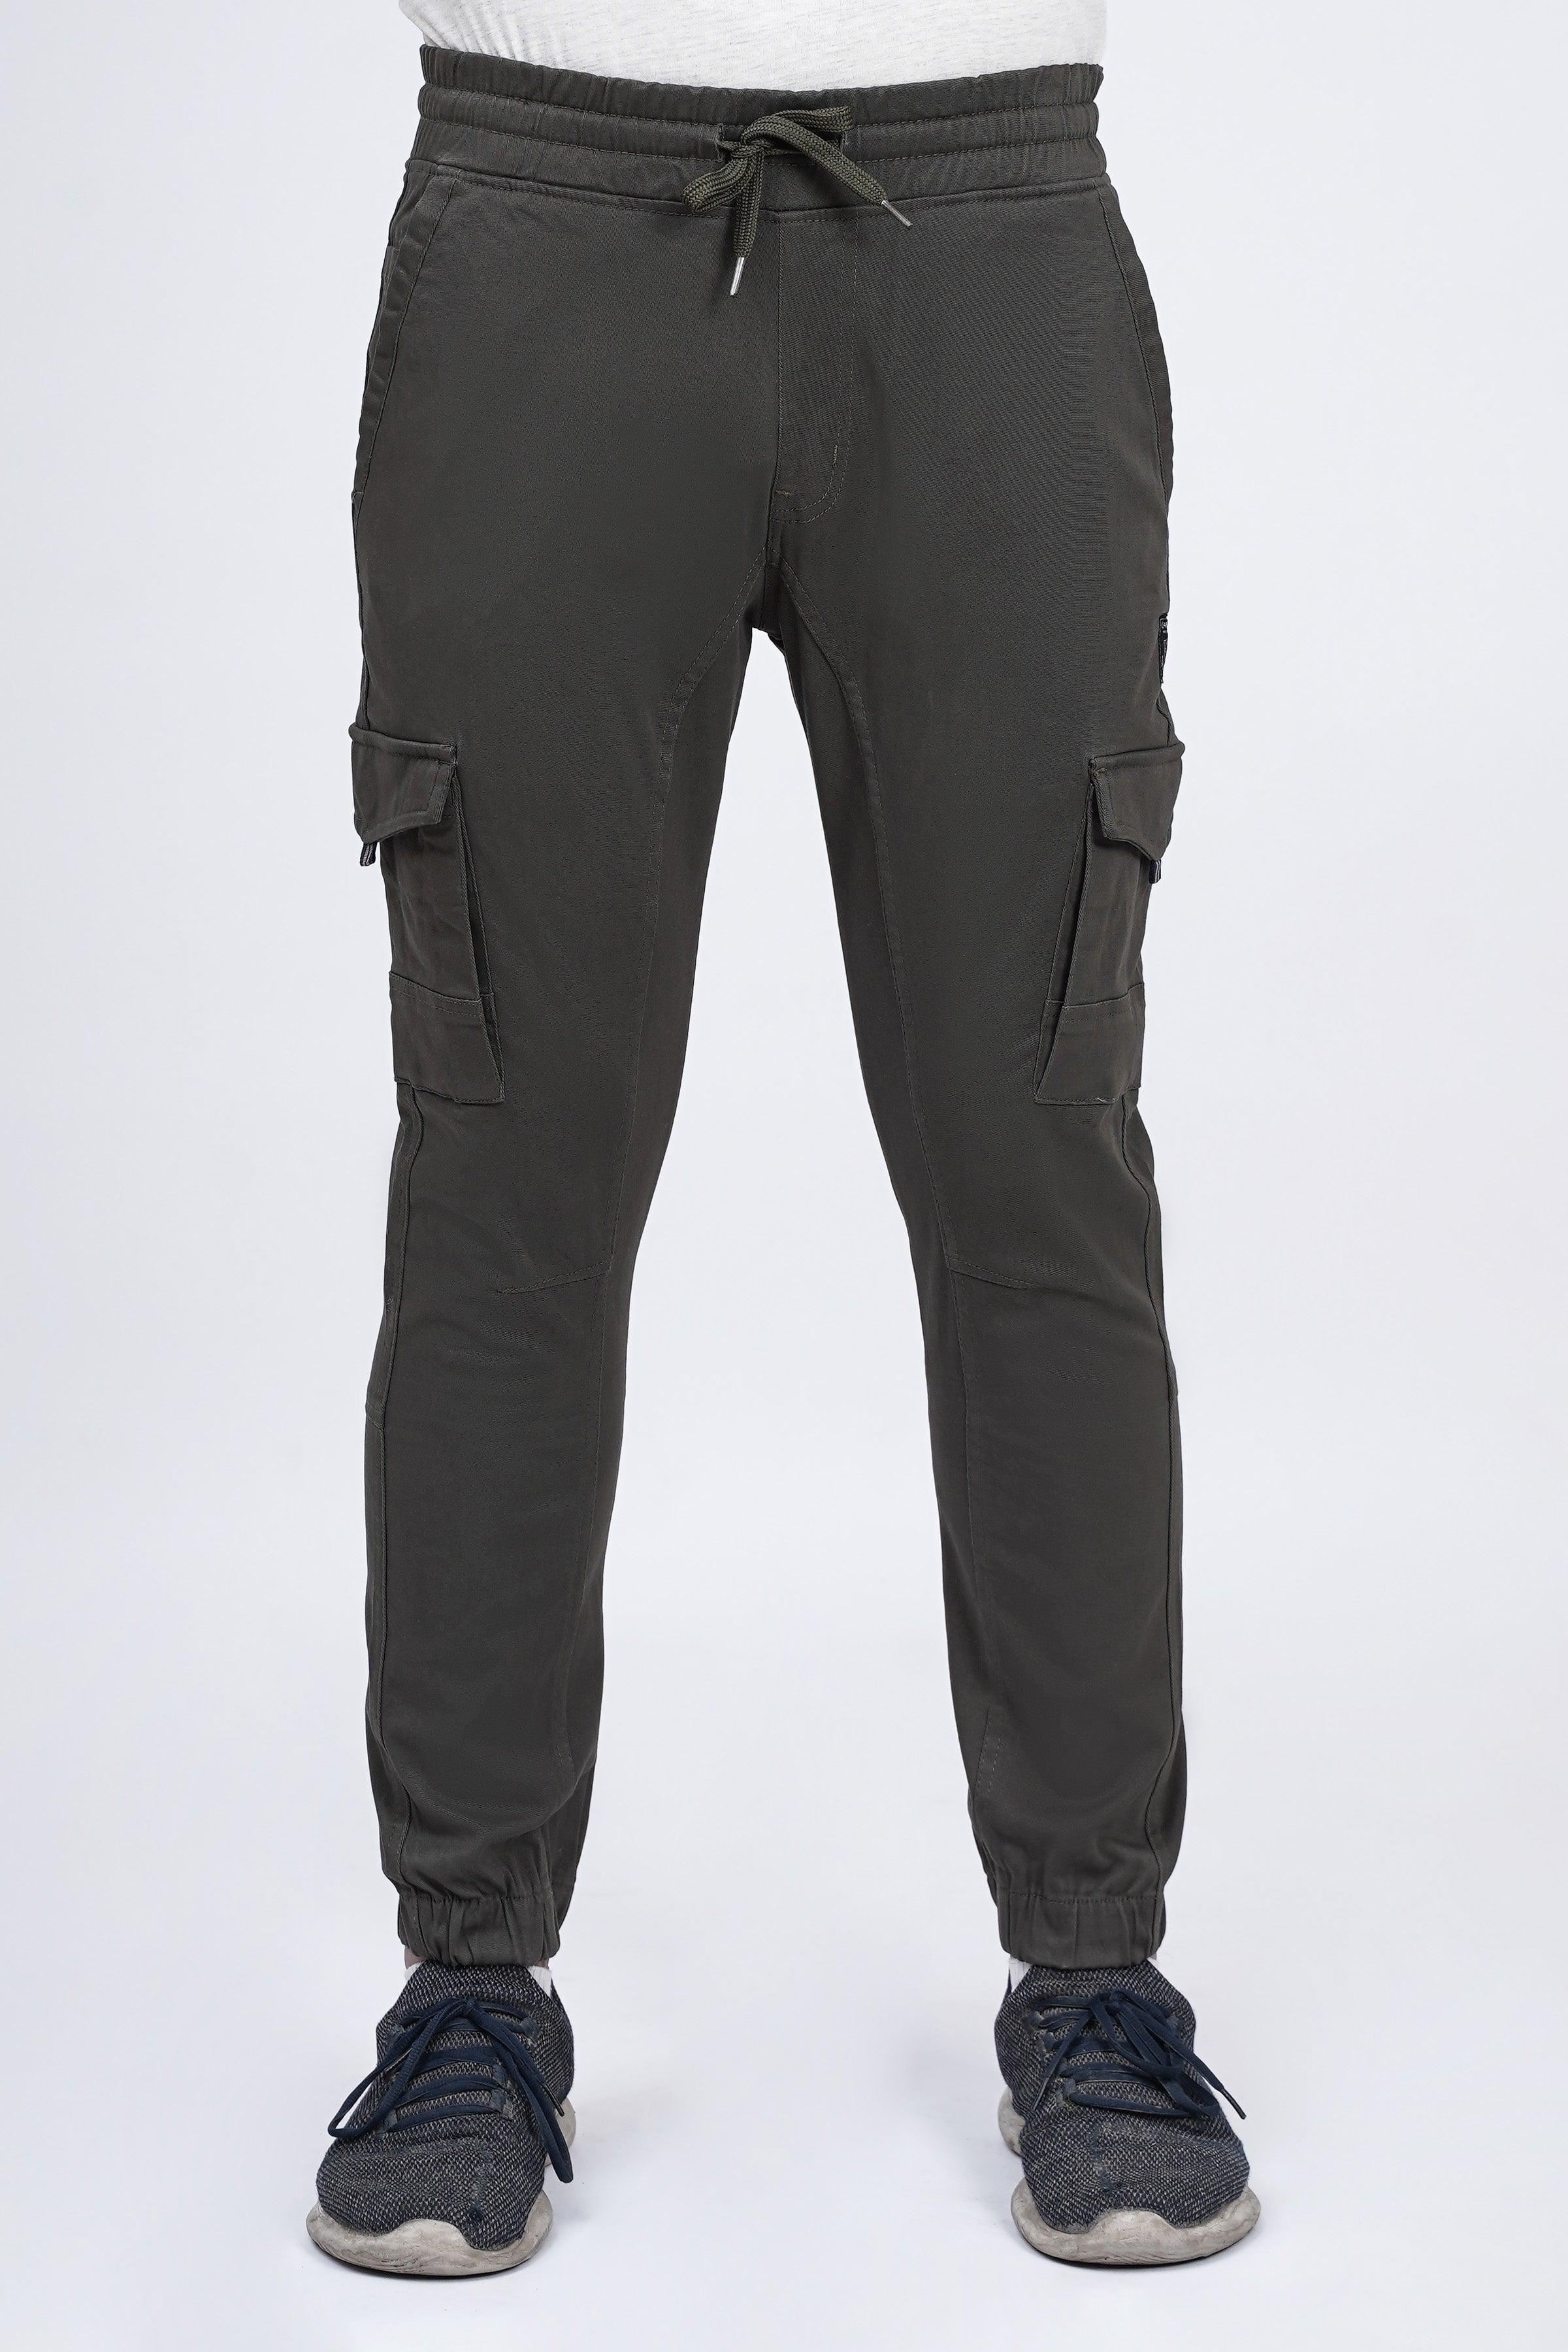 CARGO JOGGER TROUSER DARK OLIVE at Charcoal Clothing